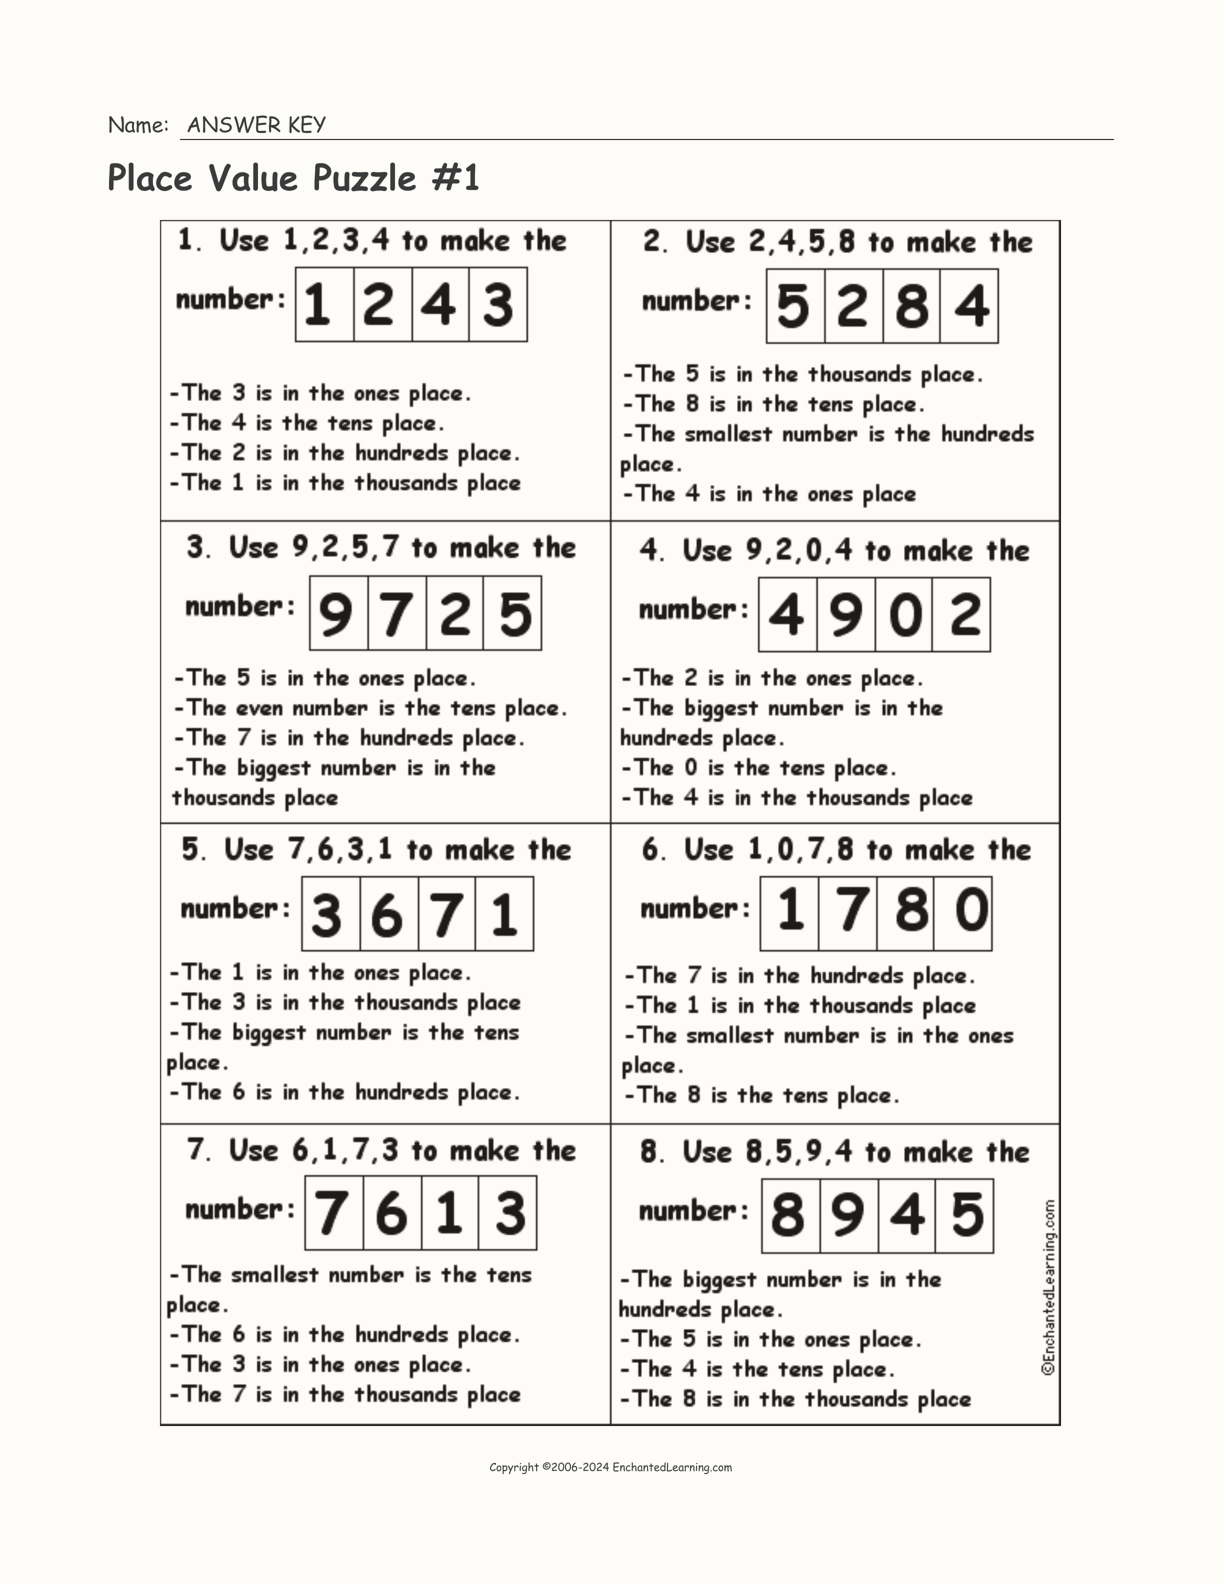 Place Value Puzzle #1 interactive worksheet page 2